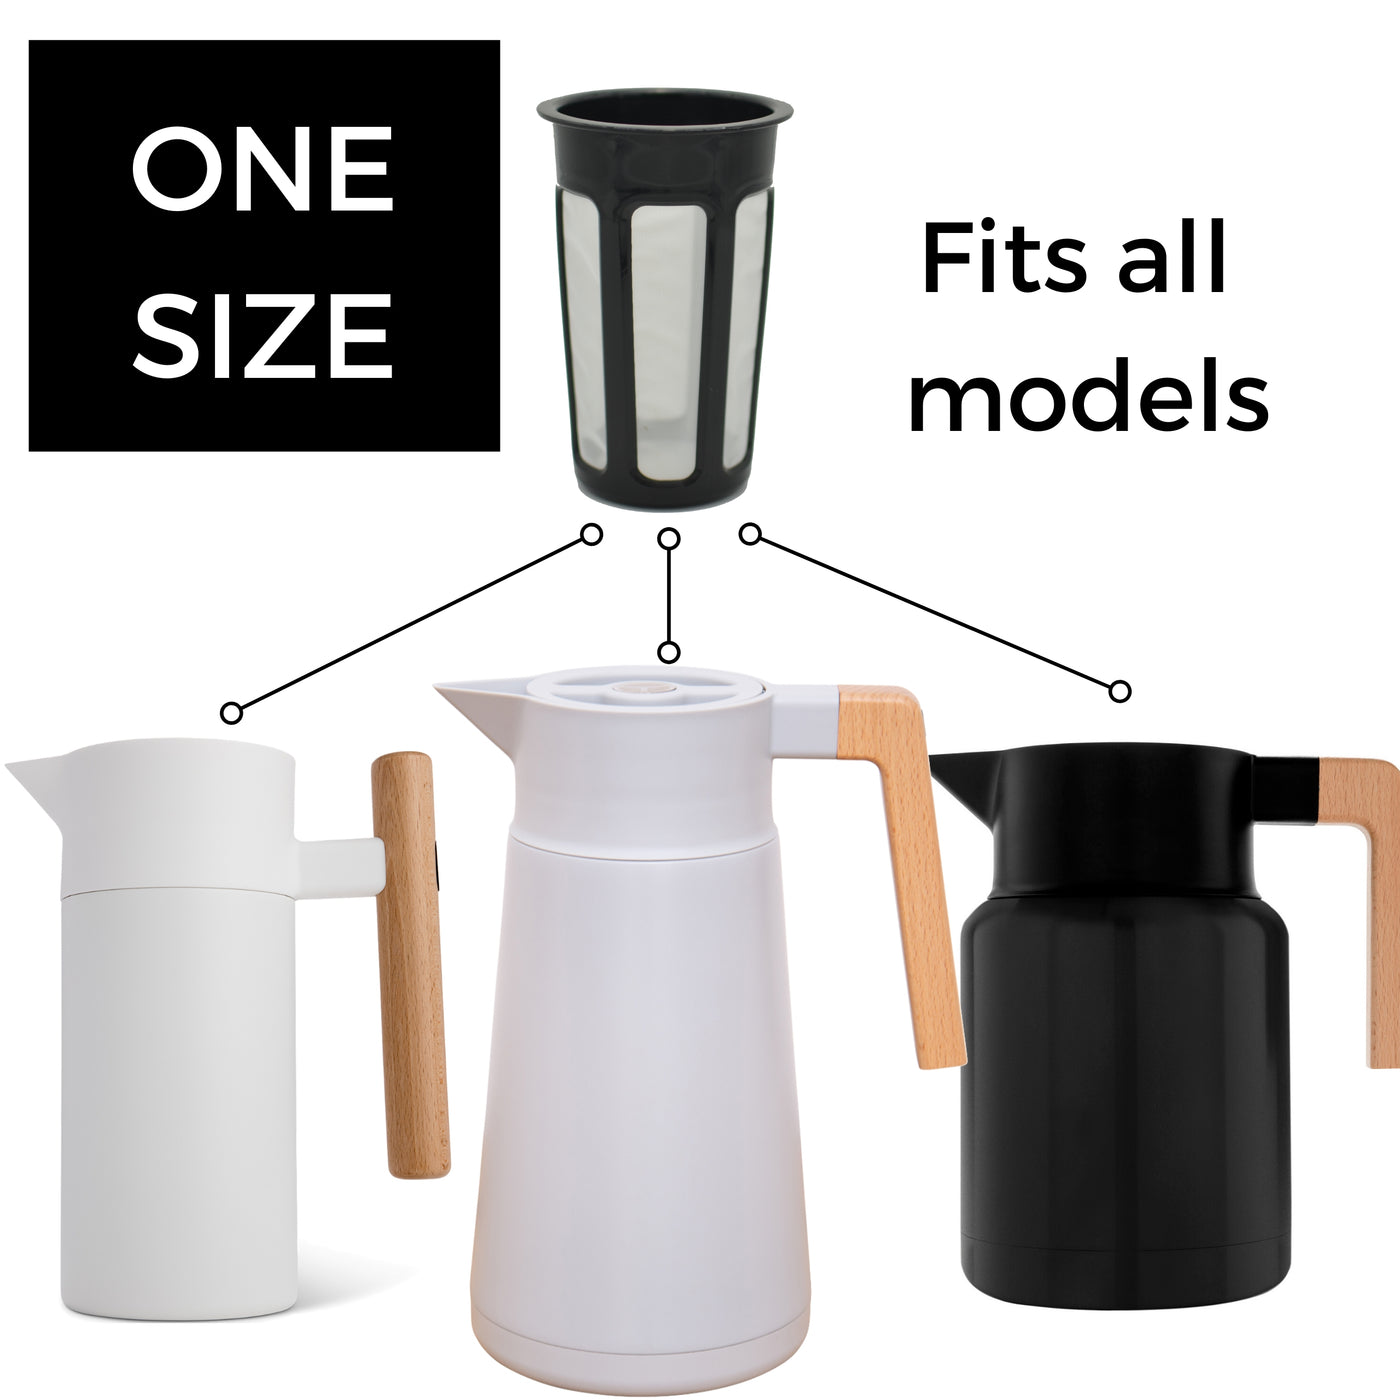 Spare Tea and Coffee Filter for Hastings Collective Thermal Carafes - Hastings Collective